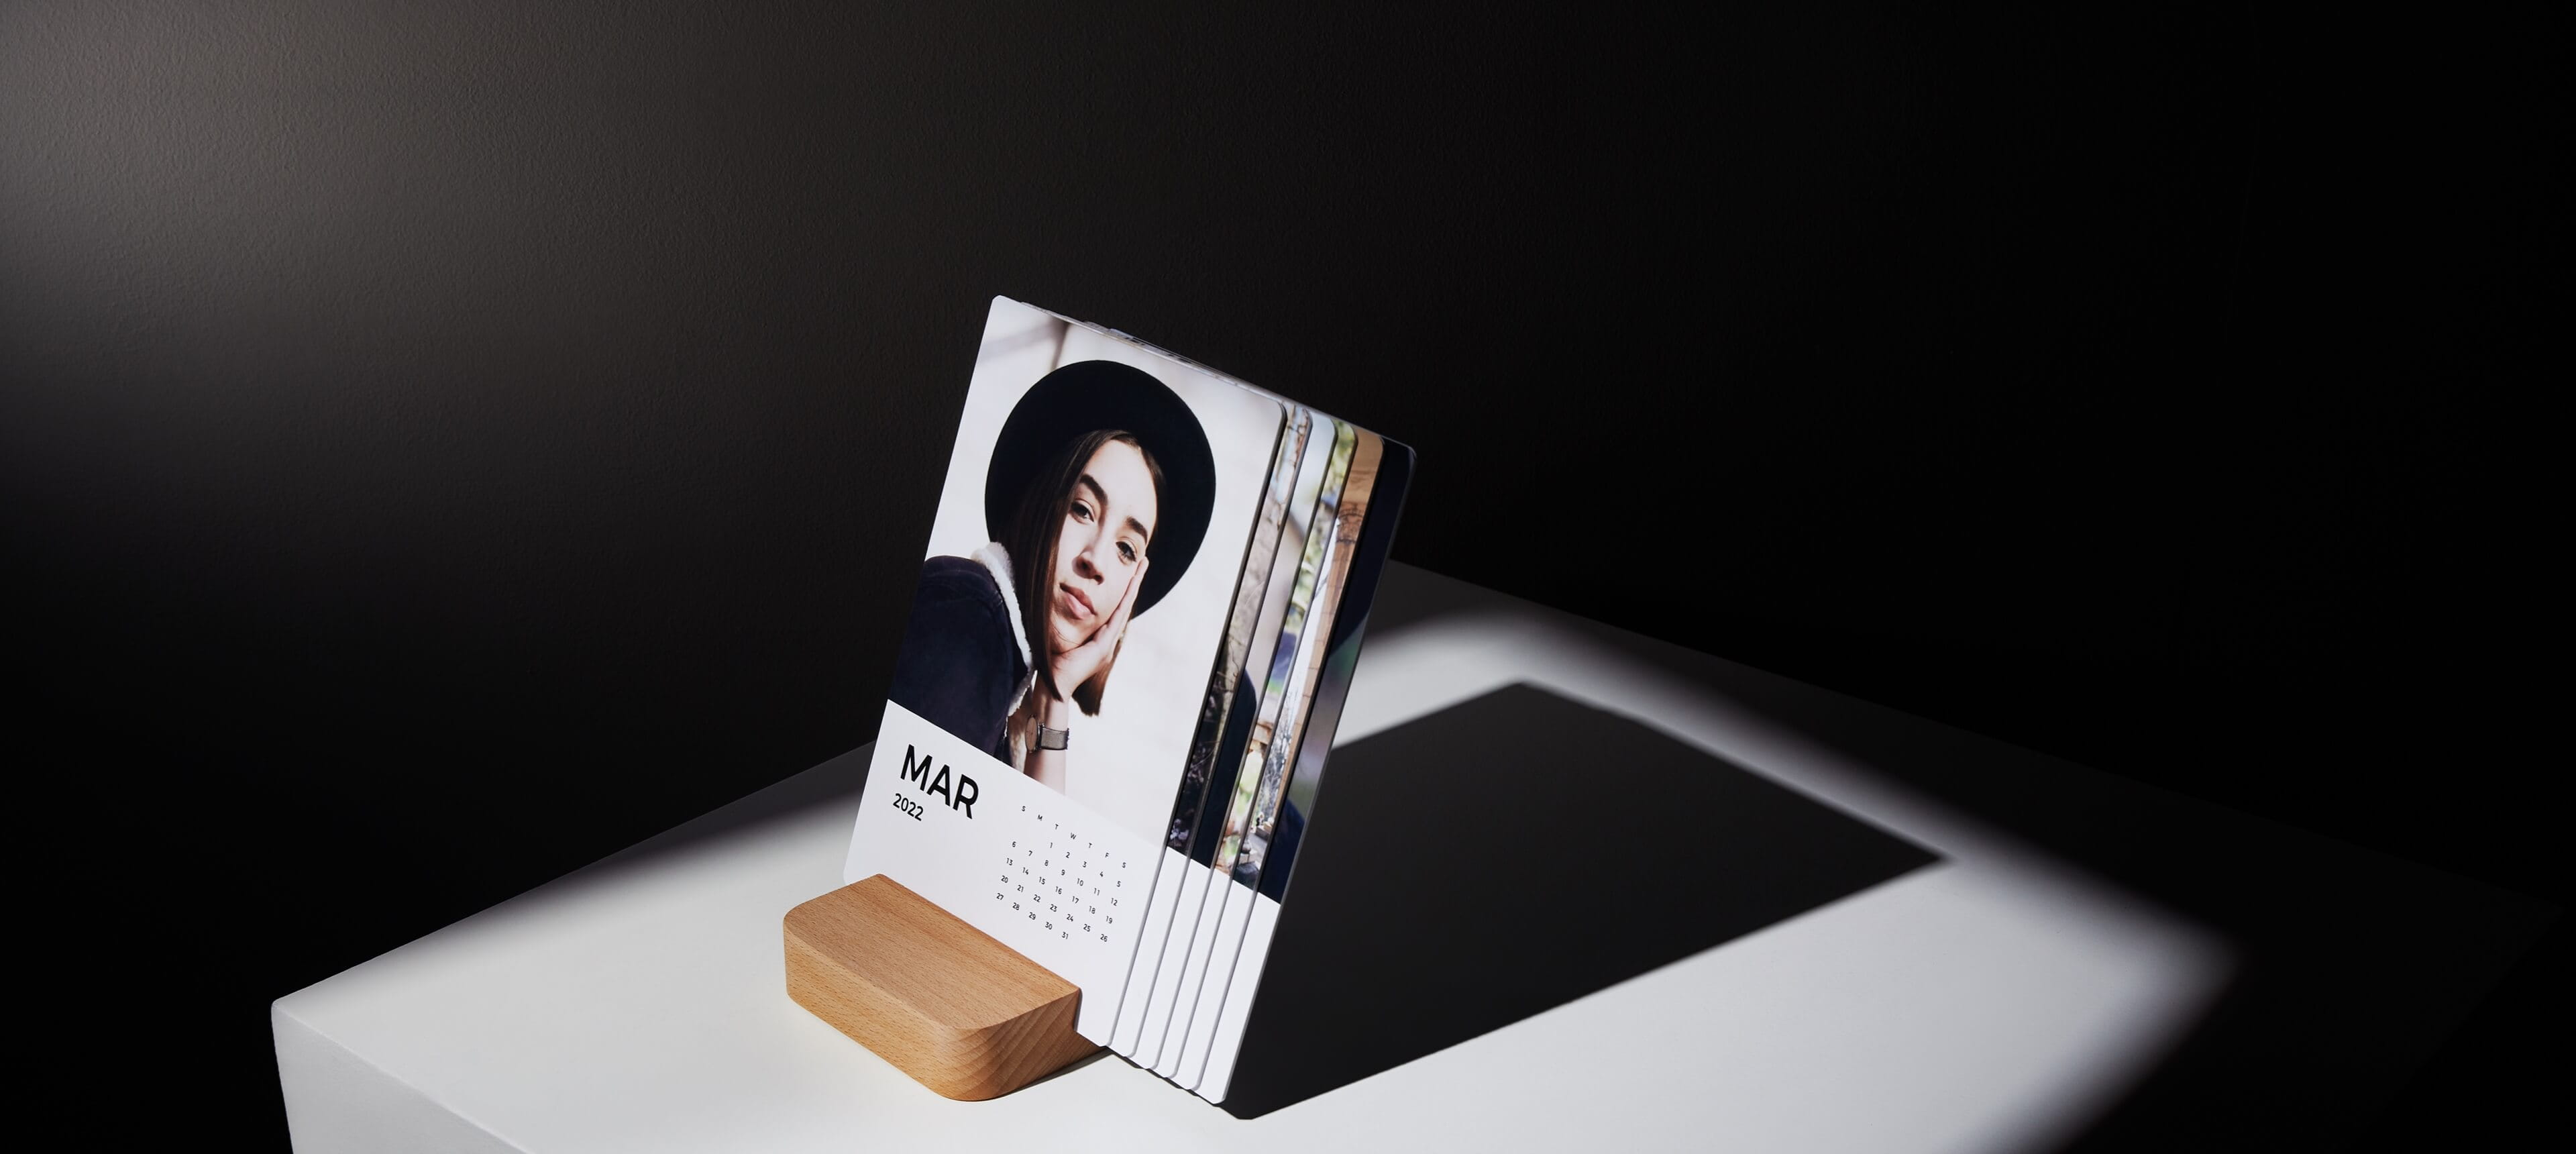 a little moments calendar on a white table showing a woman wearing a black hat